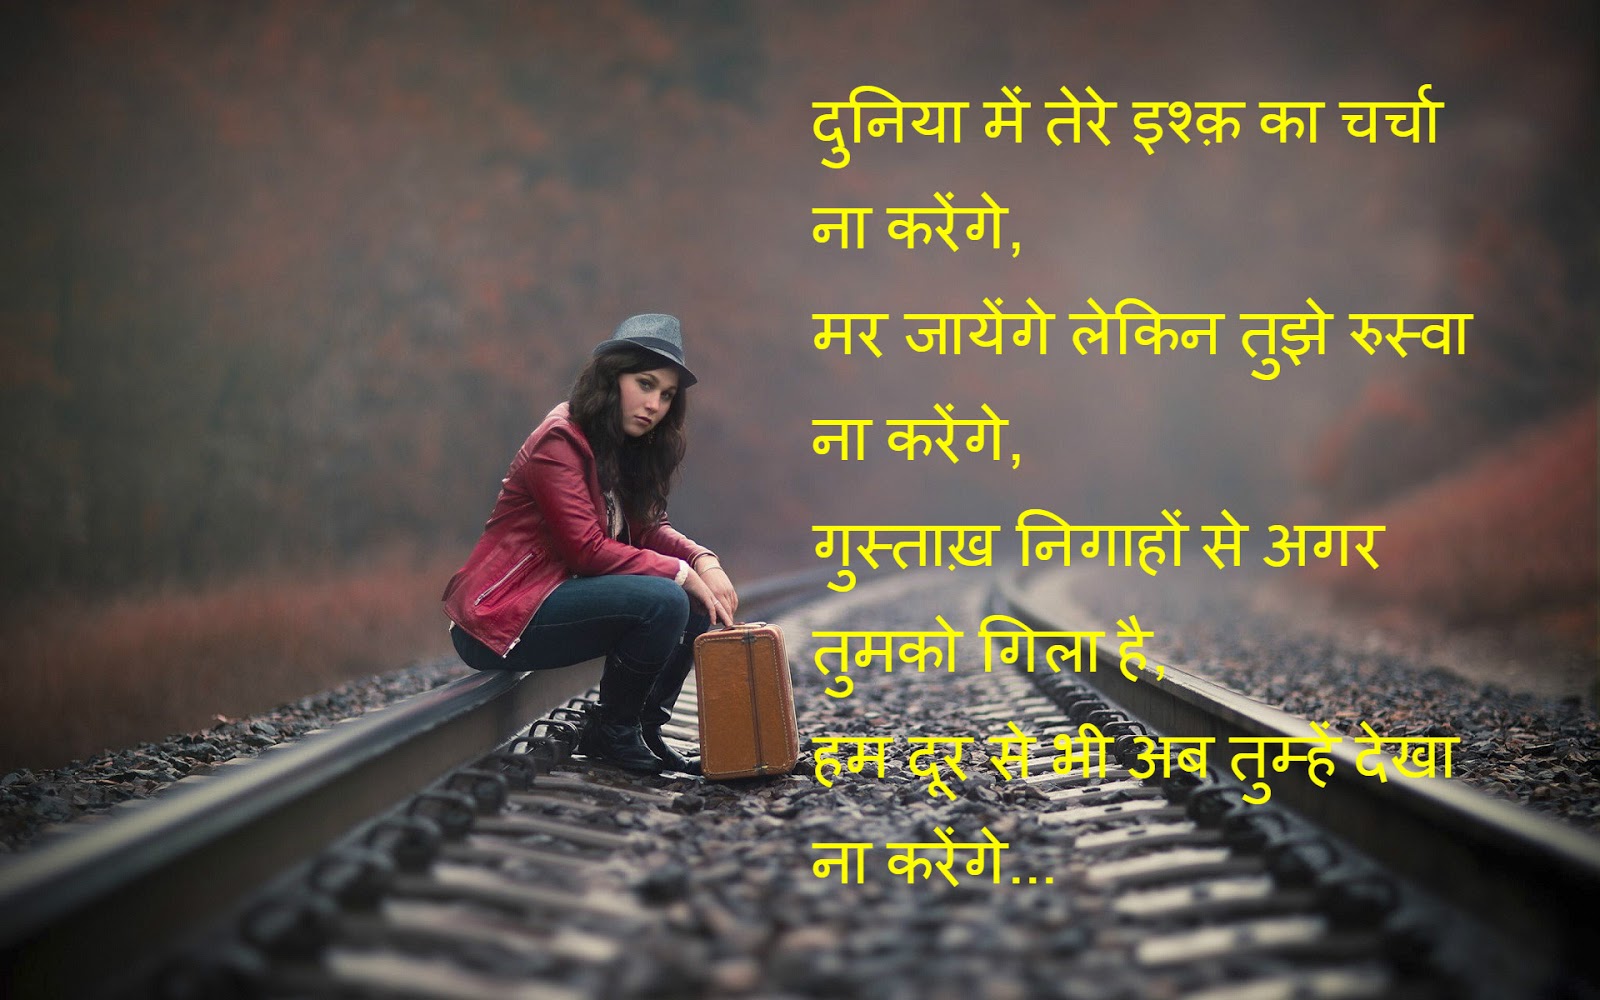 Hindi Shayari images wallpapers for Best & Latest Romantic Love Shayari Sms Messages in Hindi for Gf Bf with Lovely Pics